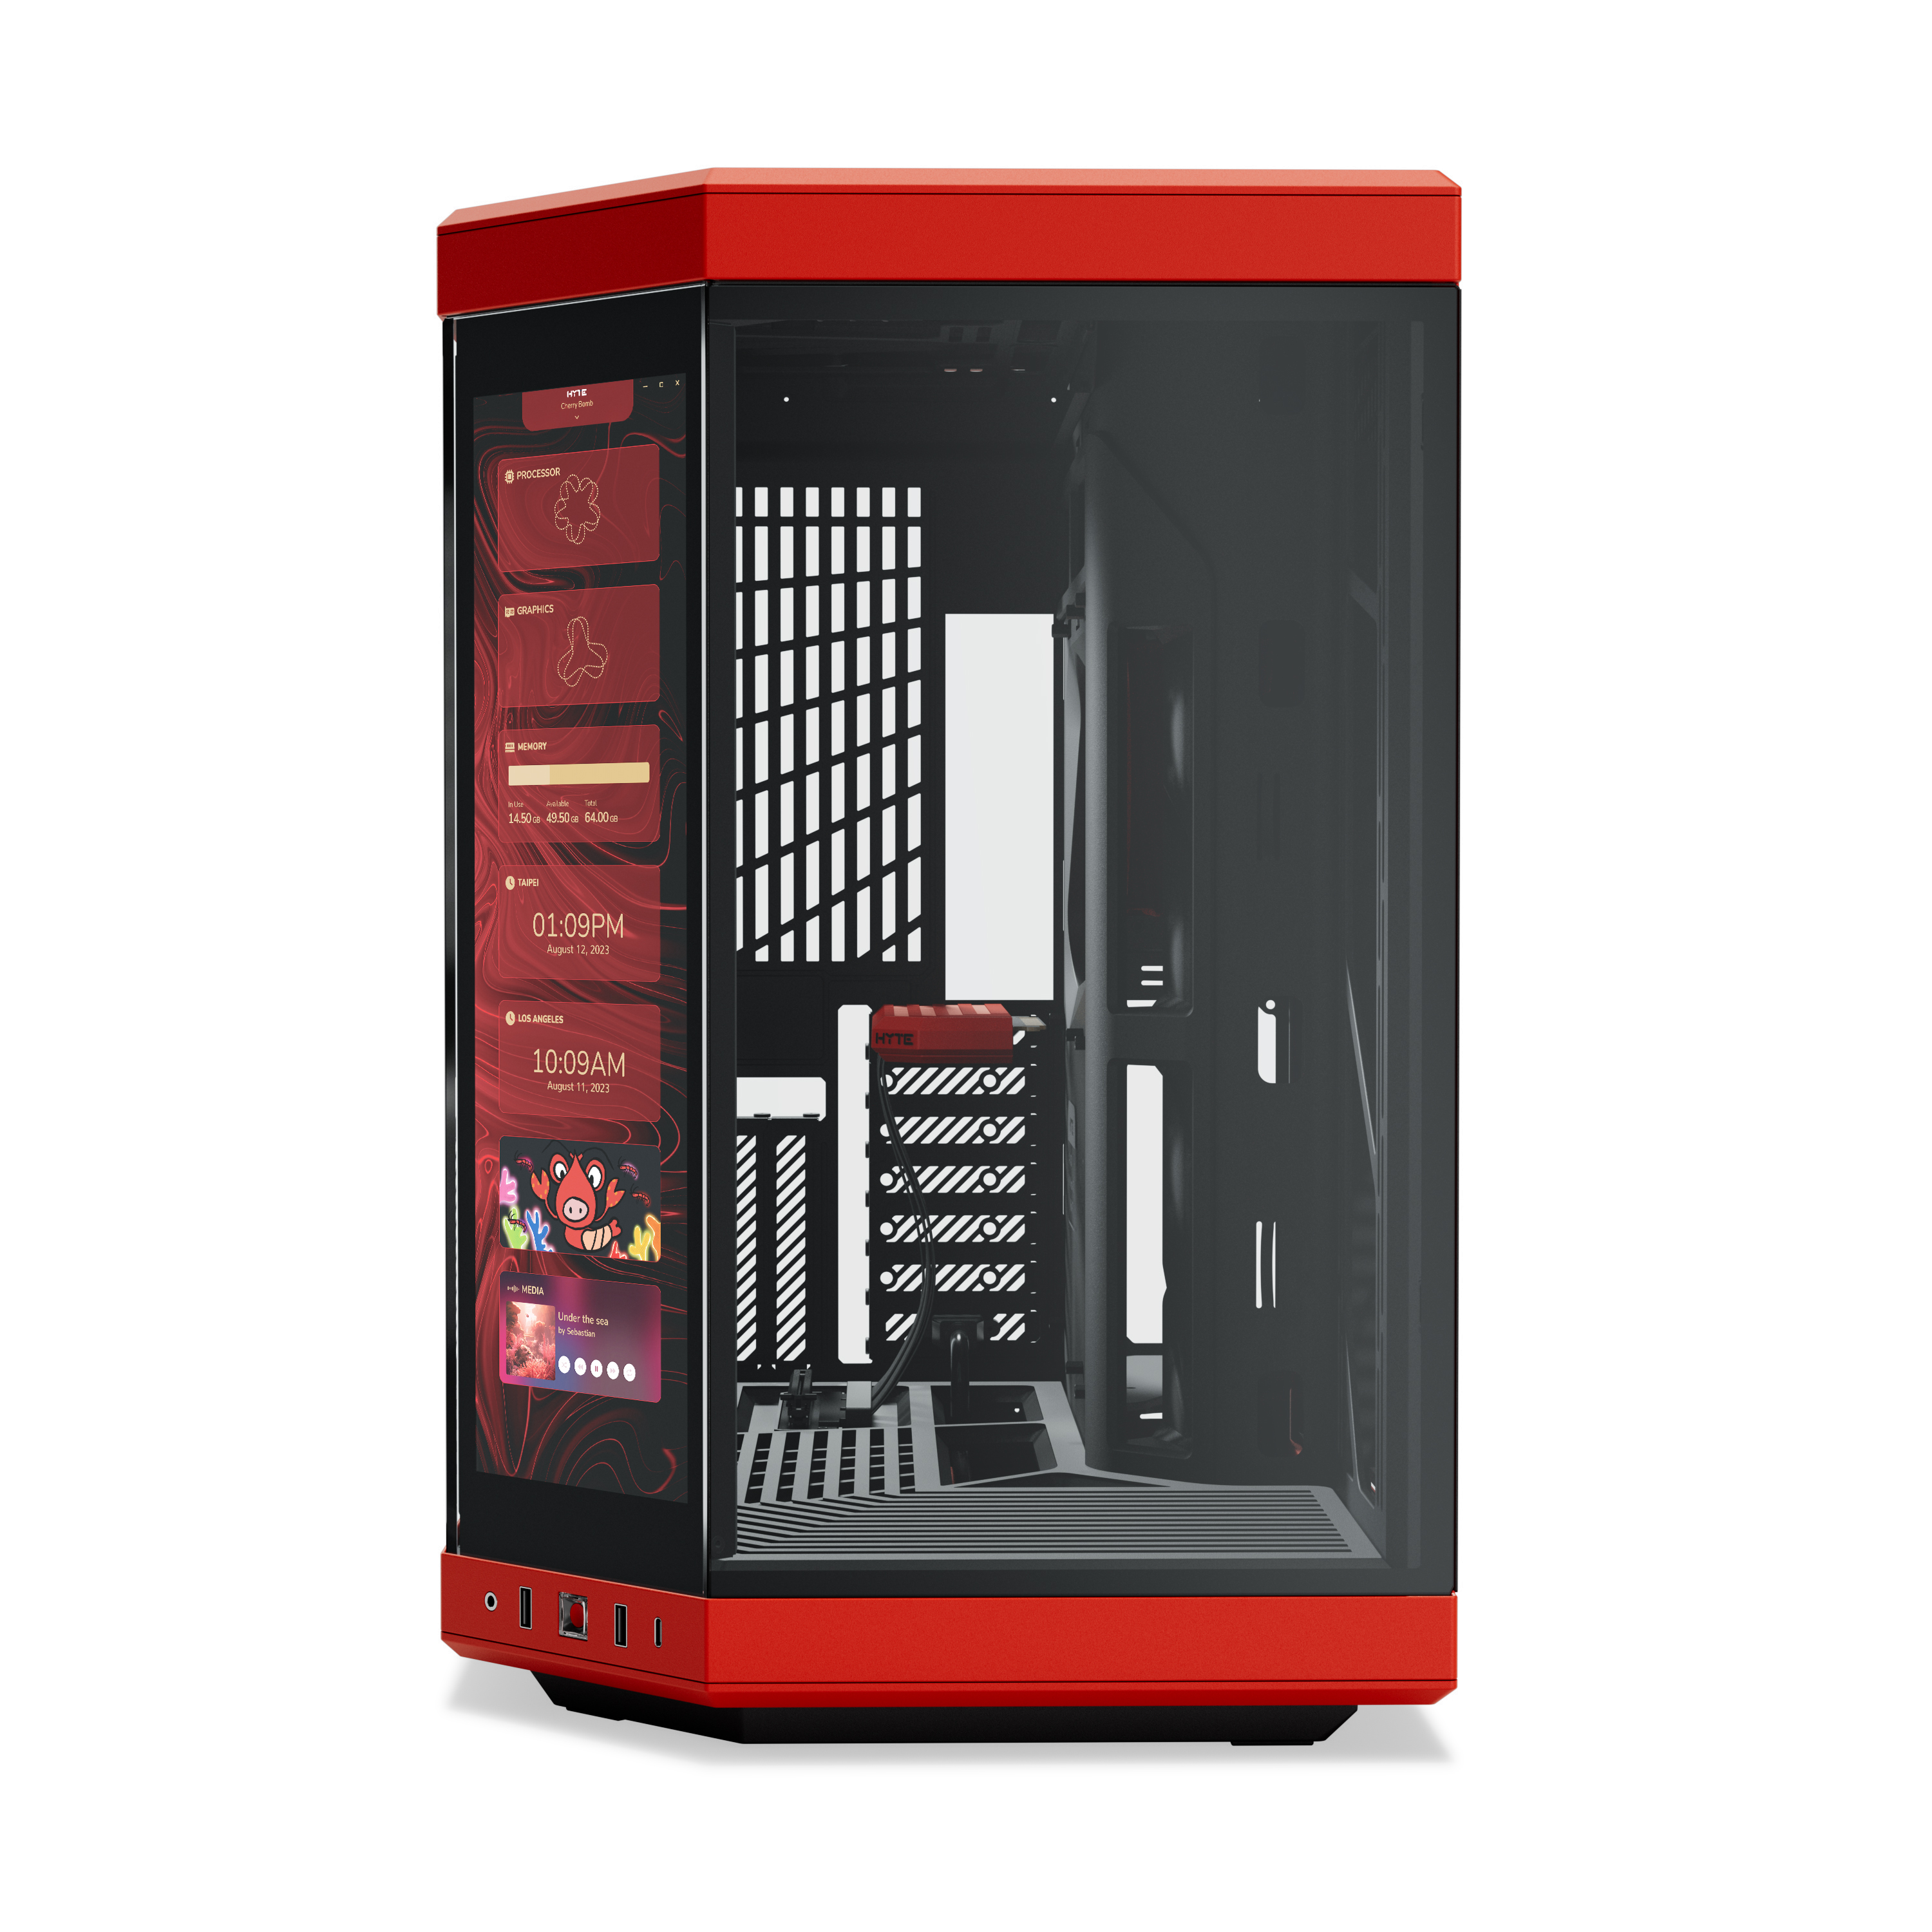 HYTE - Hyte Y70 Touch Dual Chamber Mid-Tower ATX Case - Red